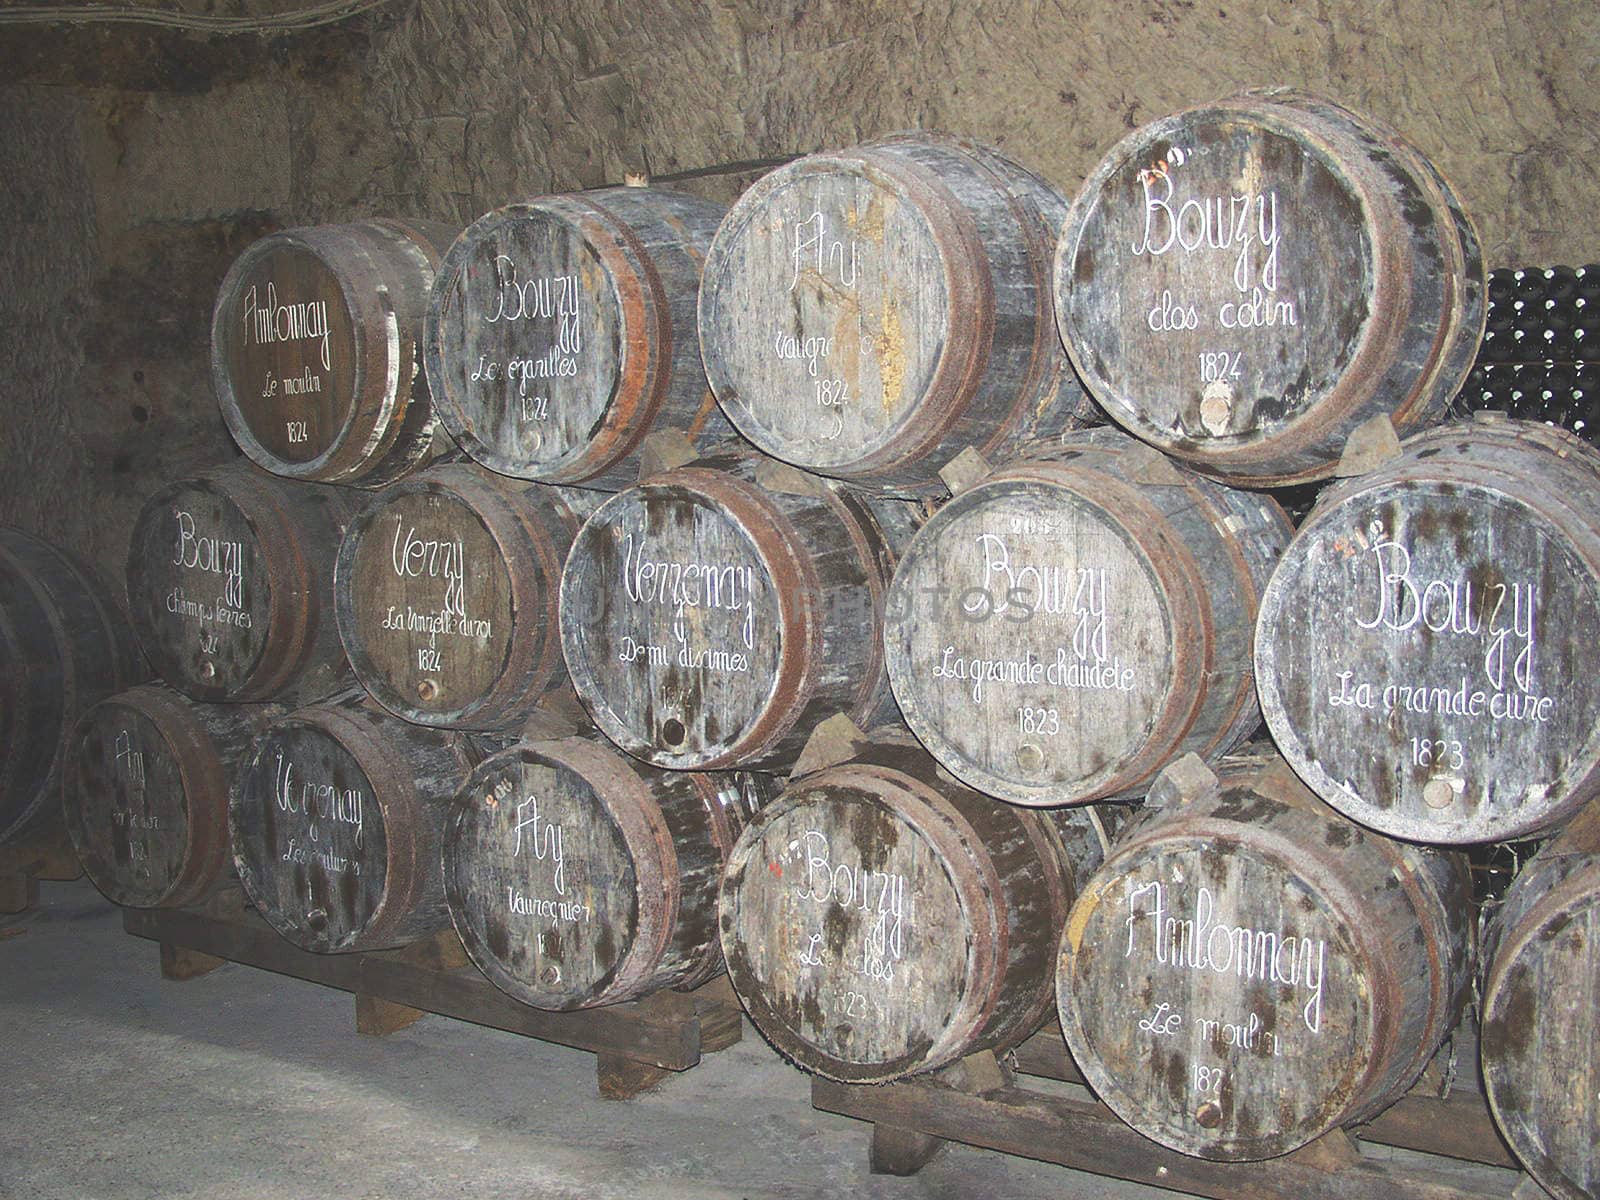 Very old barrels to transport wine